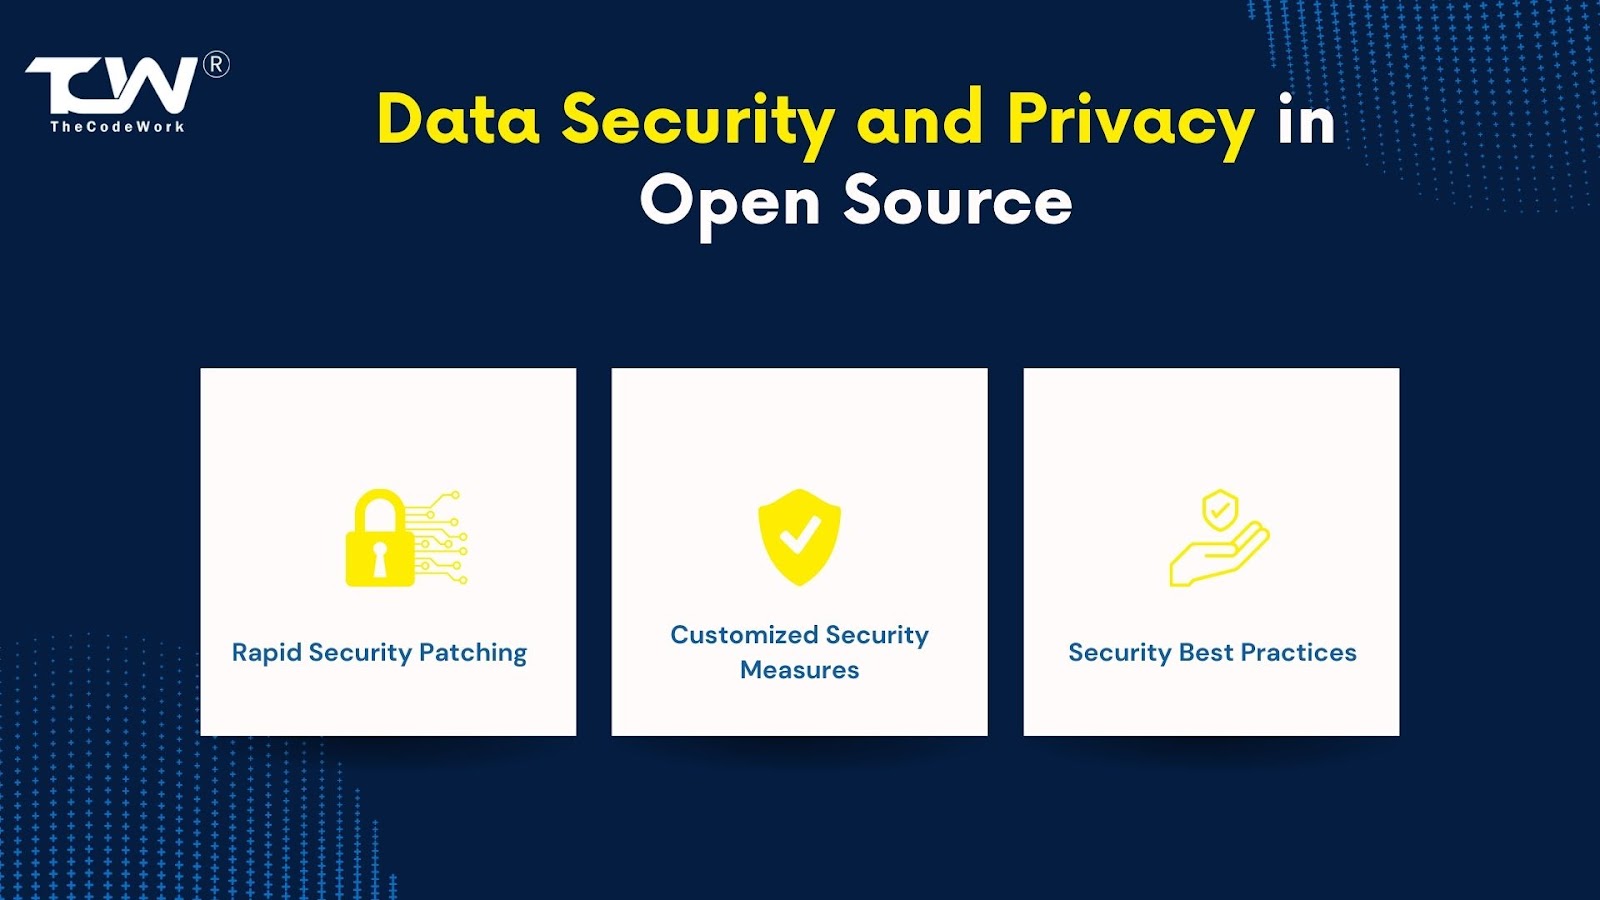 Data Security and Privacy in Open Source